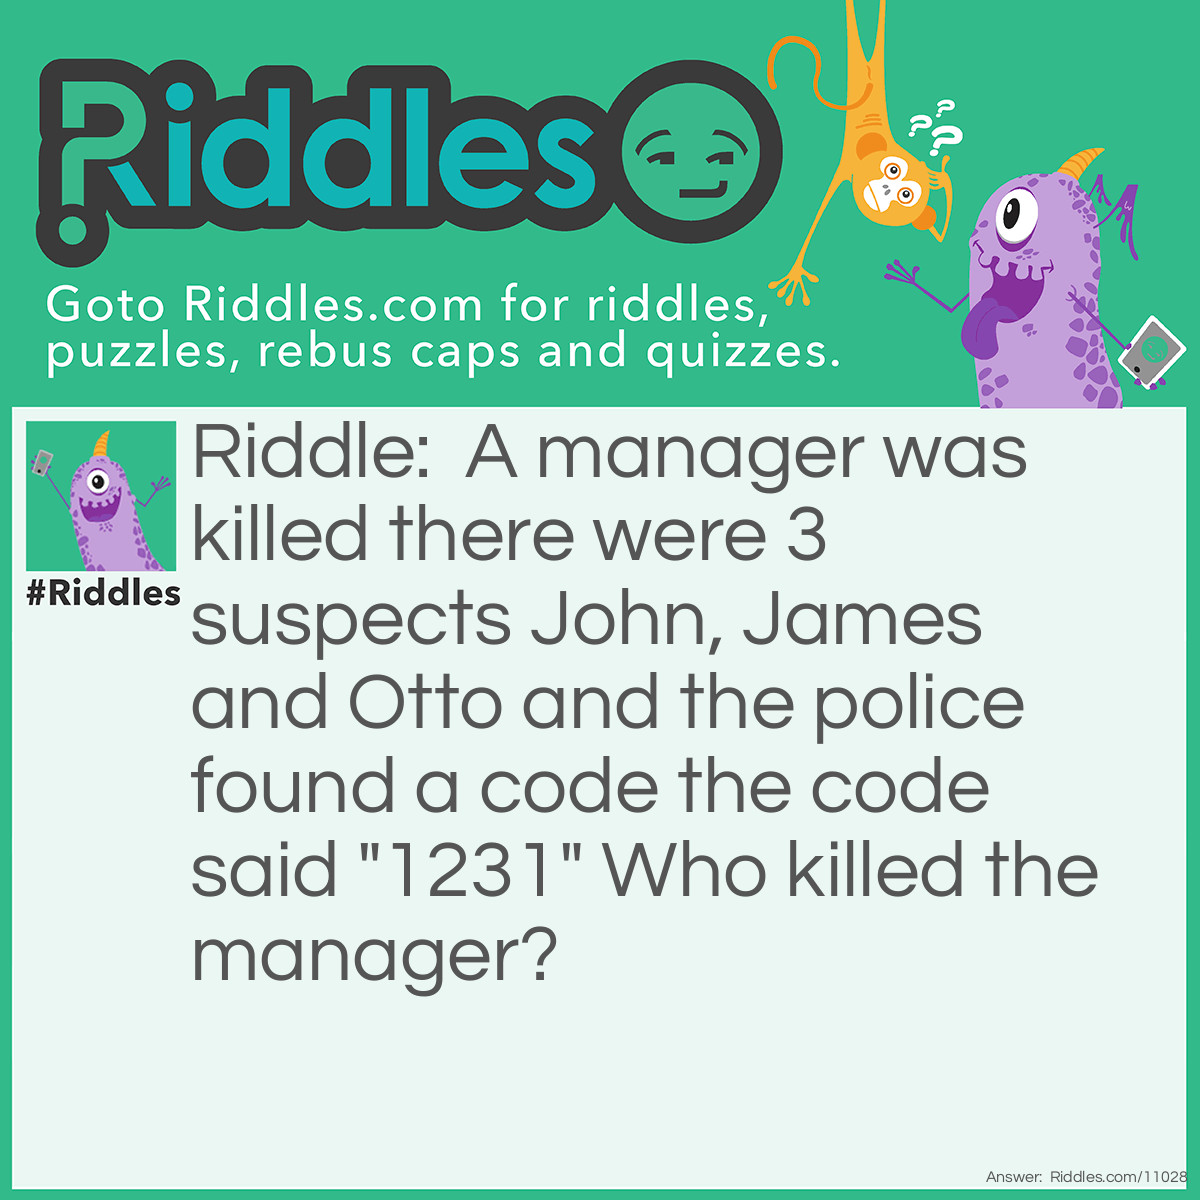 Riddle: A manager was killed there were 3 suspects John, James and Otto and the police found a code the code said "1231" Who killed the manager? Answer: Otto because 1 in eng is one 2 is two 3 is three and 1 is also again one and one represents O 2 is t 3 is t and 1 is o so Otto